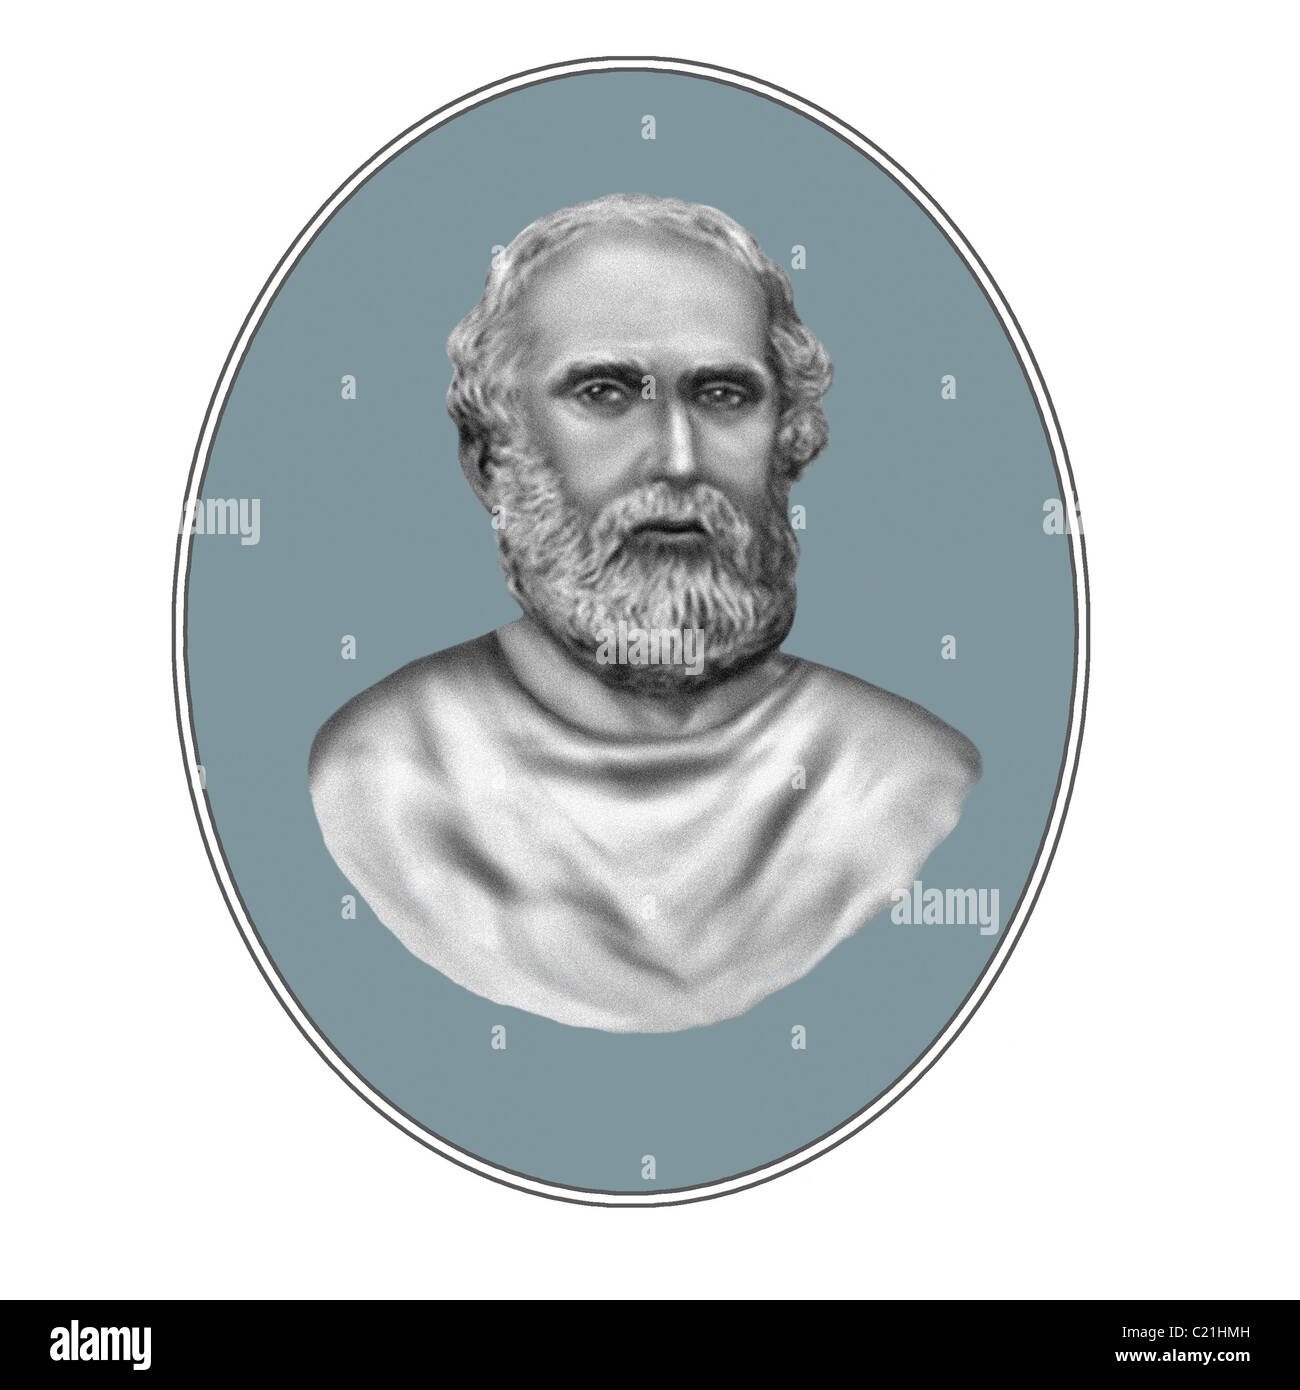 Plato c428 348 BC Greek Philosopher Illustration from an Engraving Stock Photo